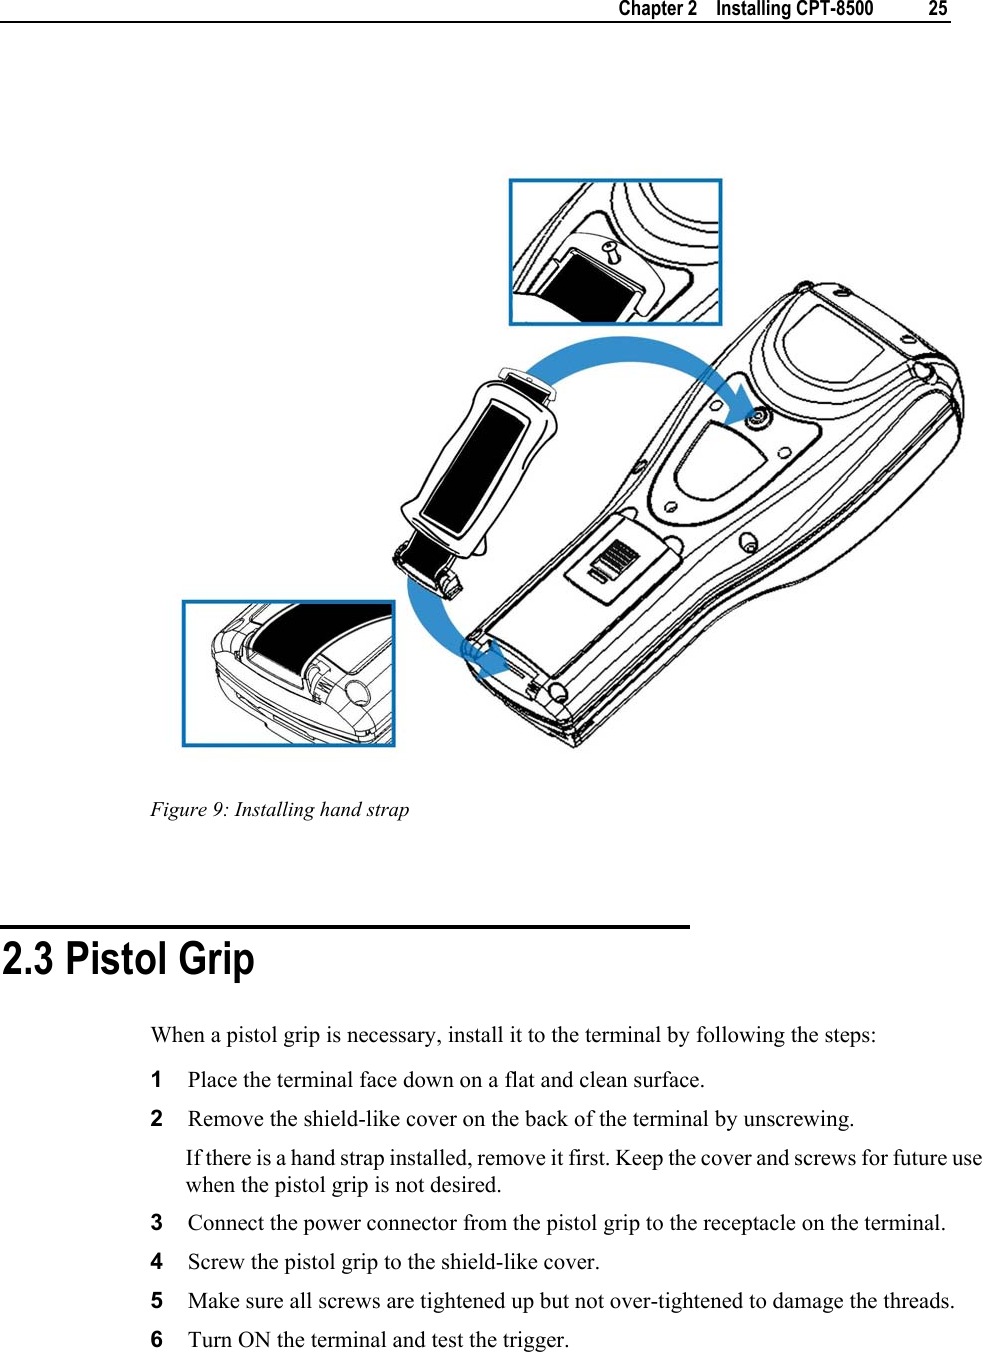    Chapter 2    Installing CPT-8500  25     Figure 9: Installing hand strap   2.3 Pistol Grip When a pistol grip is necessary, install it to the terminal by following the steps: 1  Place the terminal face down on a flat and clean surface.  2  Remove the shield-like cover on the back of the terminal by unscrewing.  If there is a hand strap installed, remove it first. Keep the cover and screws for future use when the pistol grip is not desired. 3  Connect the power connector from the pistol grip to the receptacle on the terminal. 4  Screw the pistol grip to the shield-like cover. 5  Make sure all screws are tightened up but not over-tightened to damage the threads. 6  Turn ON the terminal and test the trigger. 